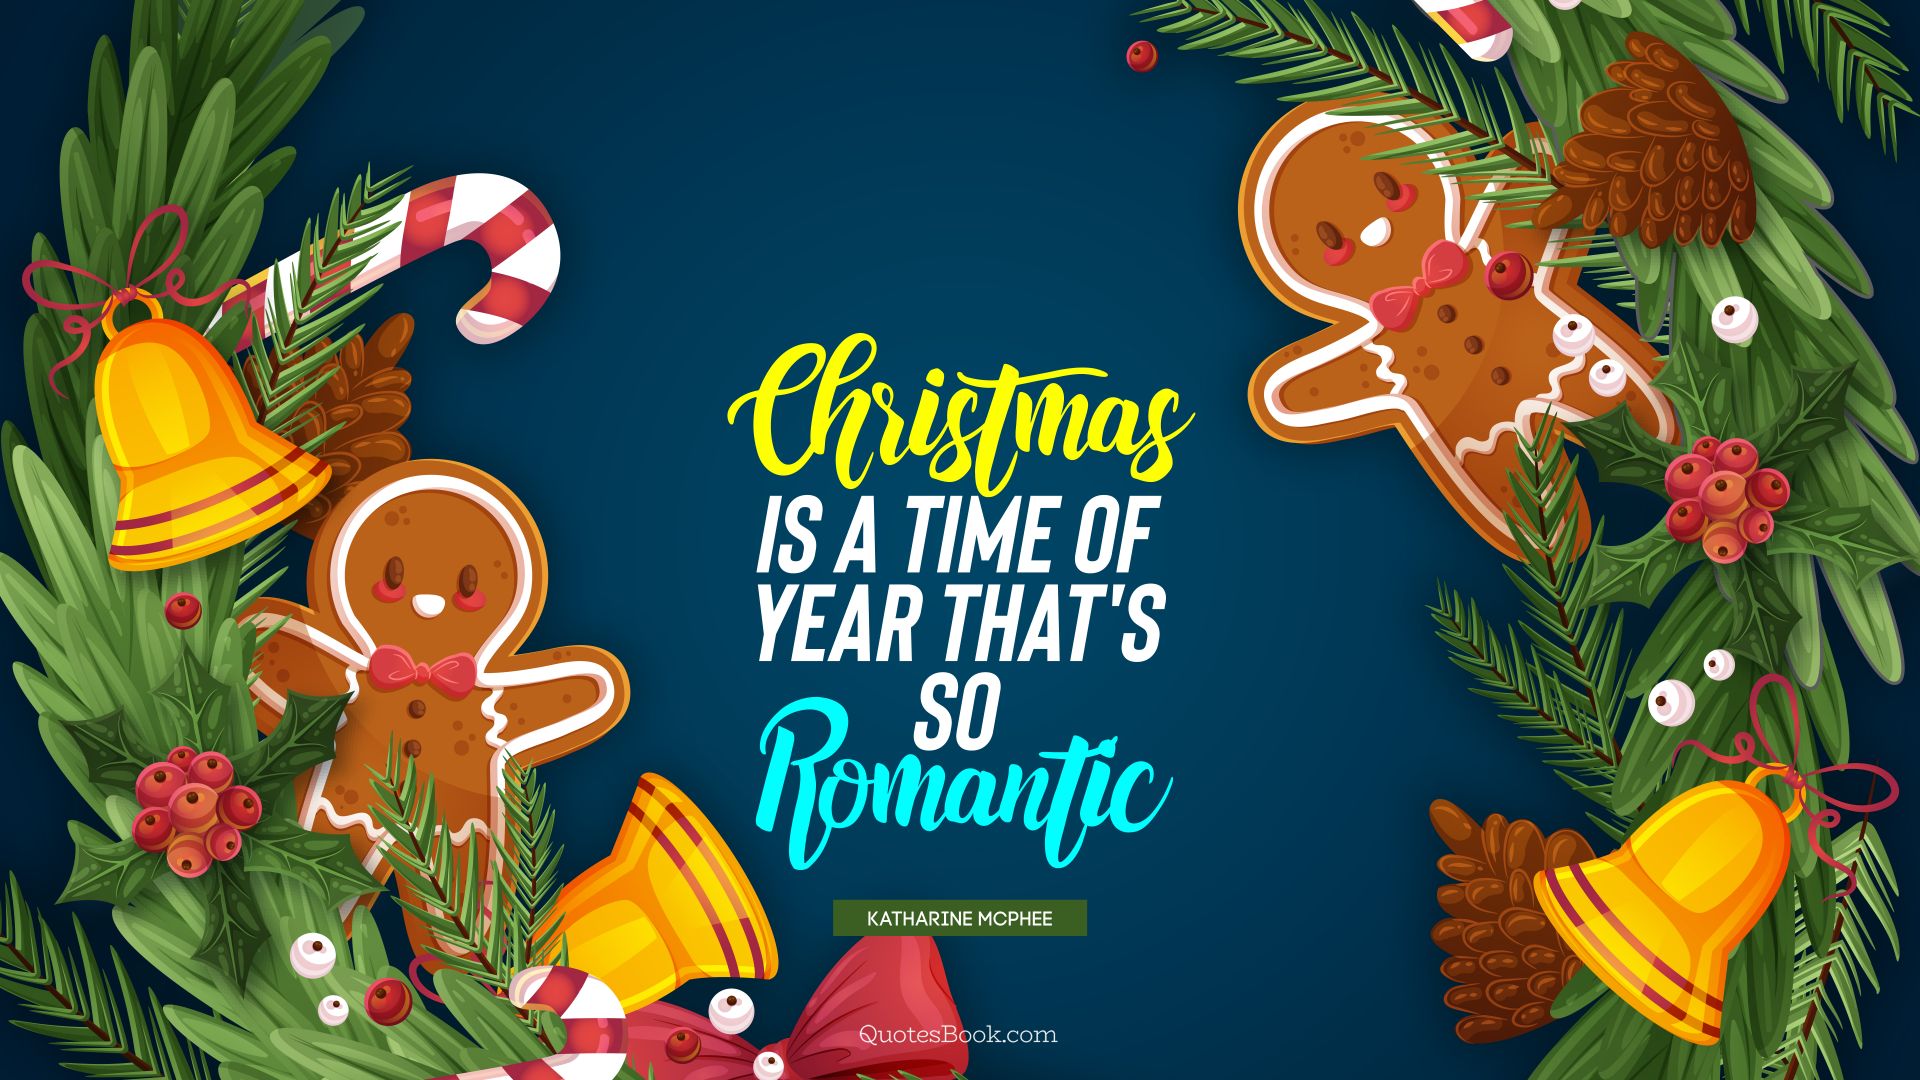 Christmas is a time of year that's so romantic. - Quote by Katharine McPhee